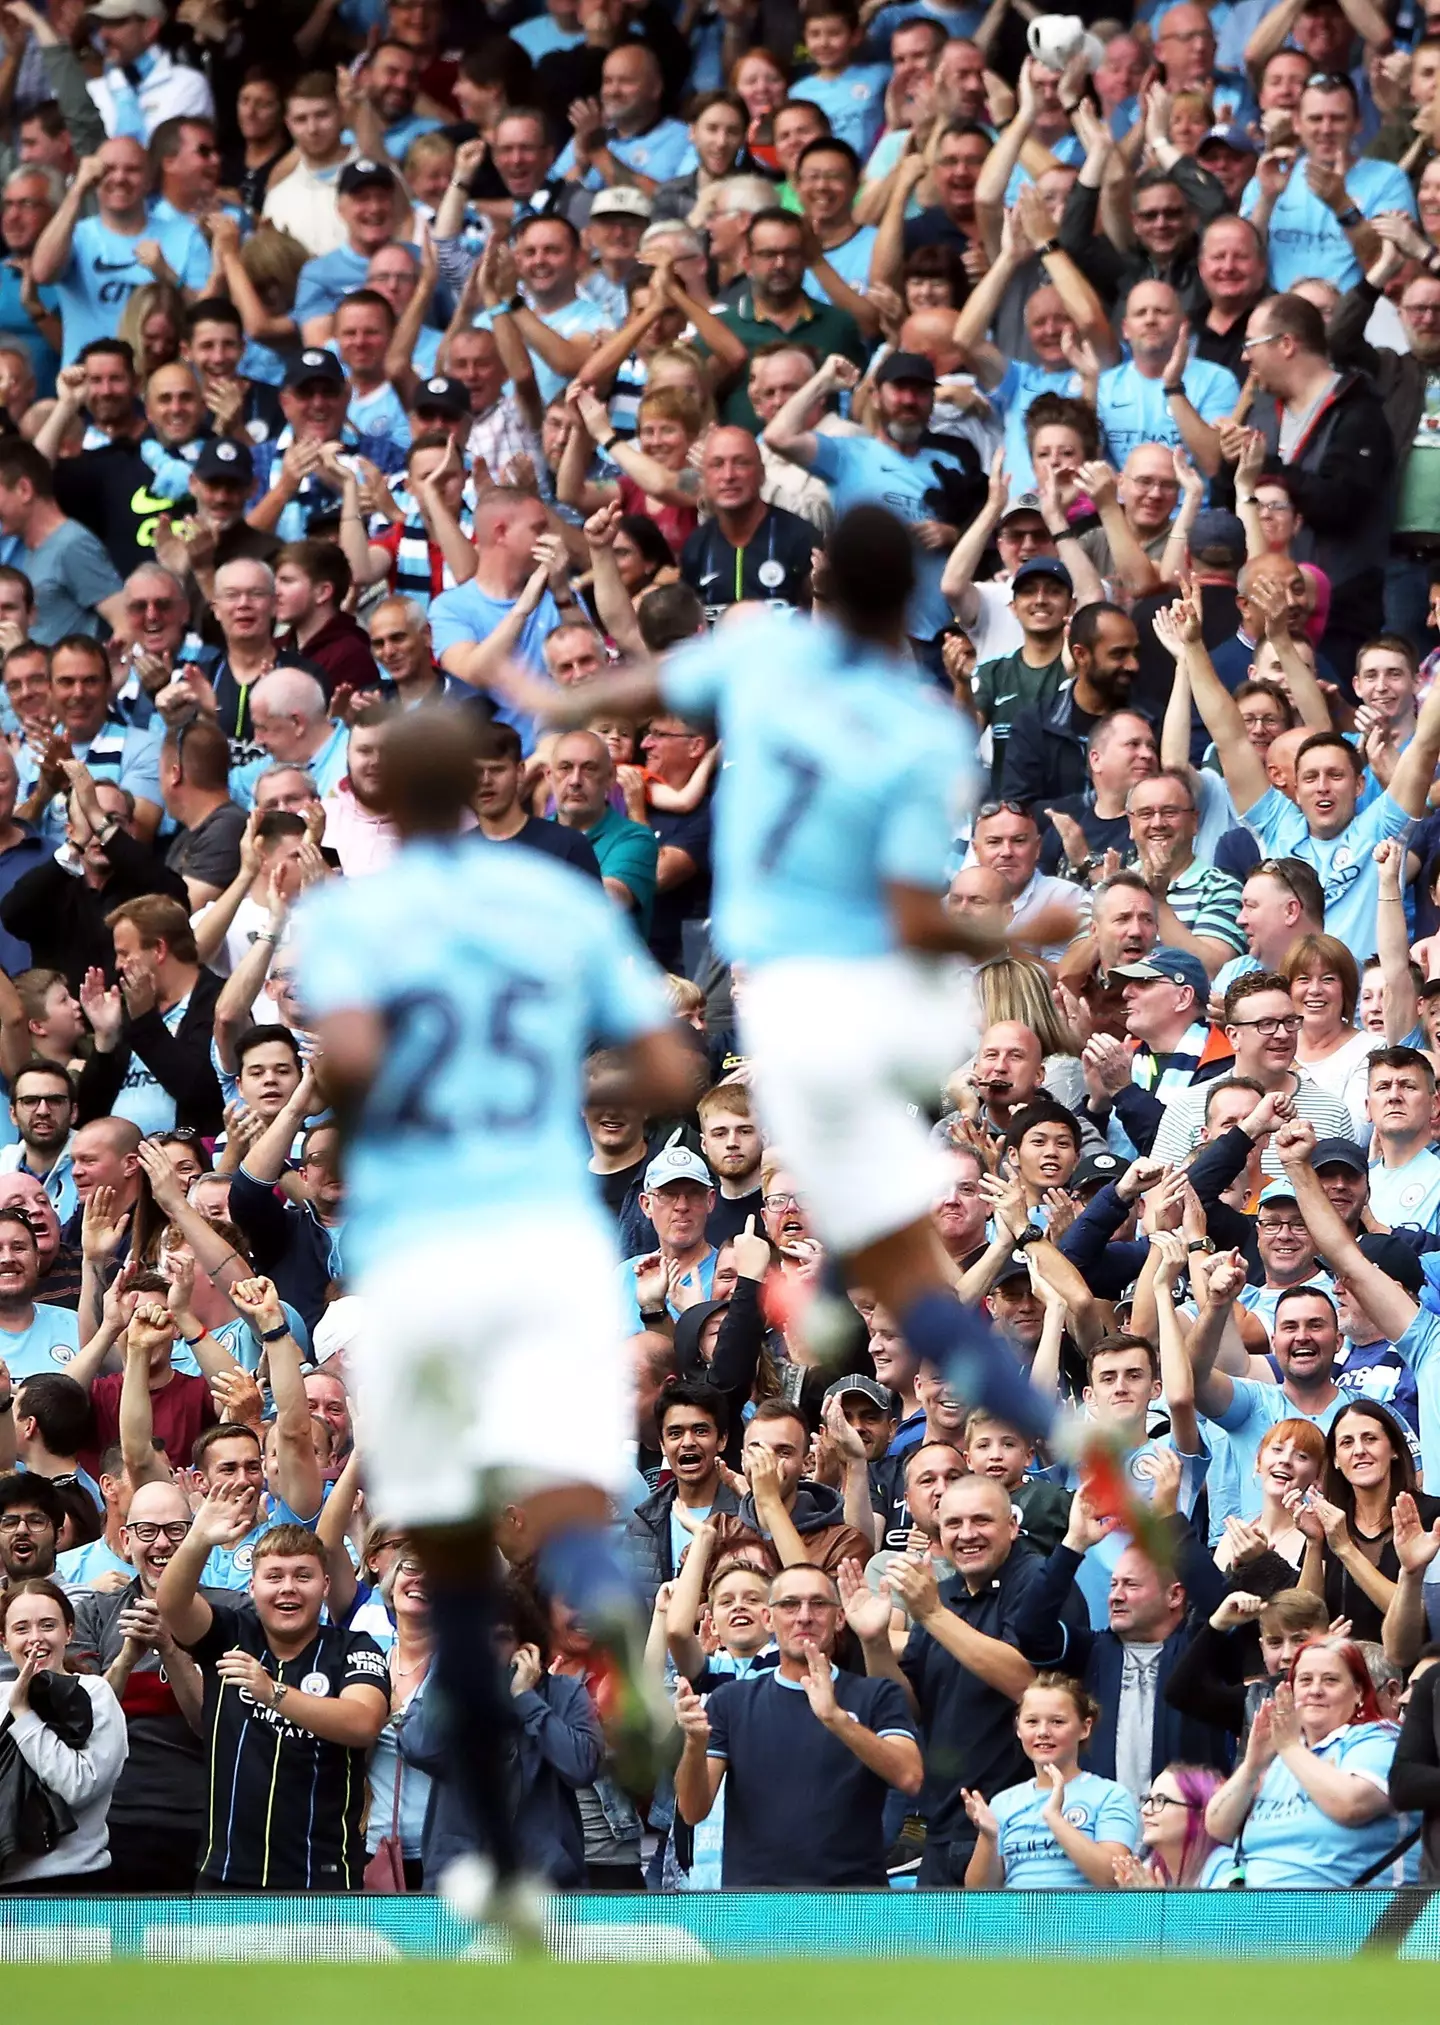 Manchester City's Raheem Sterling (right) celebrates scoring his side's first goal of the game with team-mate Luis Fernandinho in front of the fans. (Alamy)